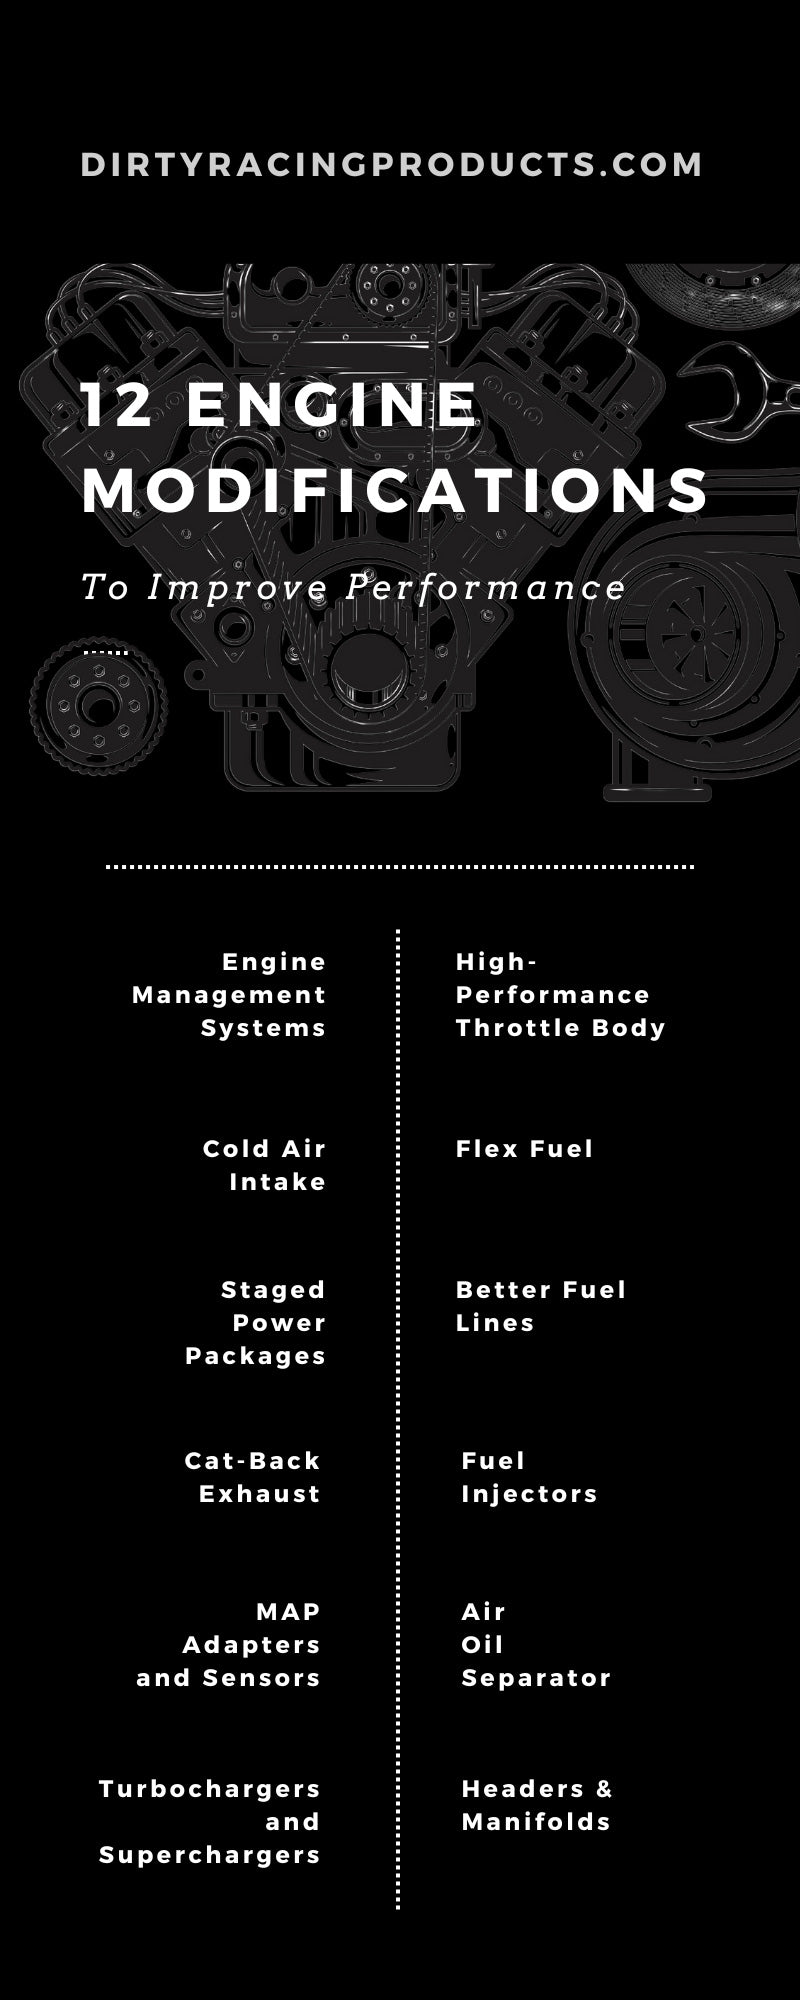 12 Engine Modifications To Improve Performance